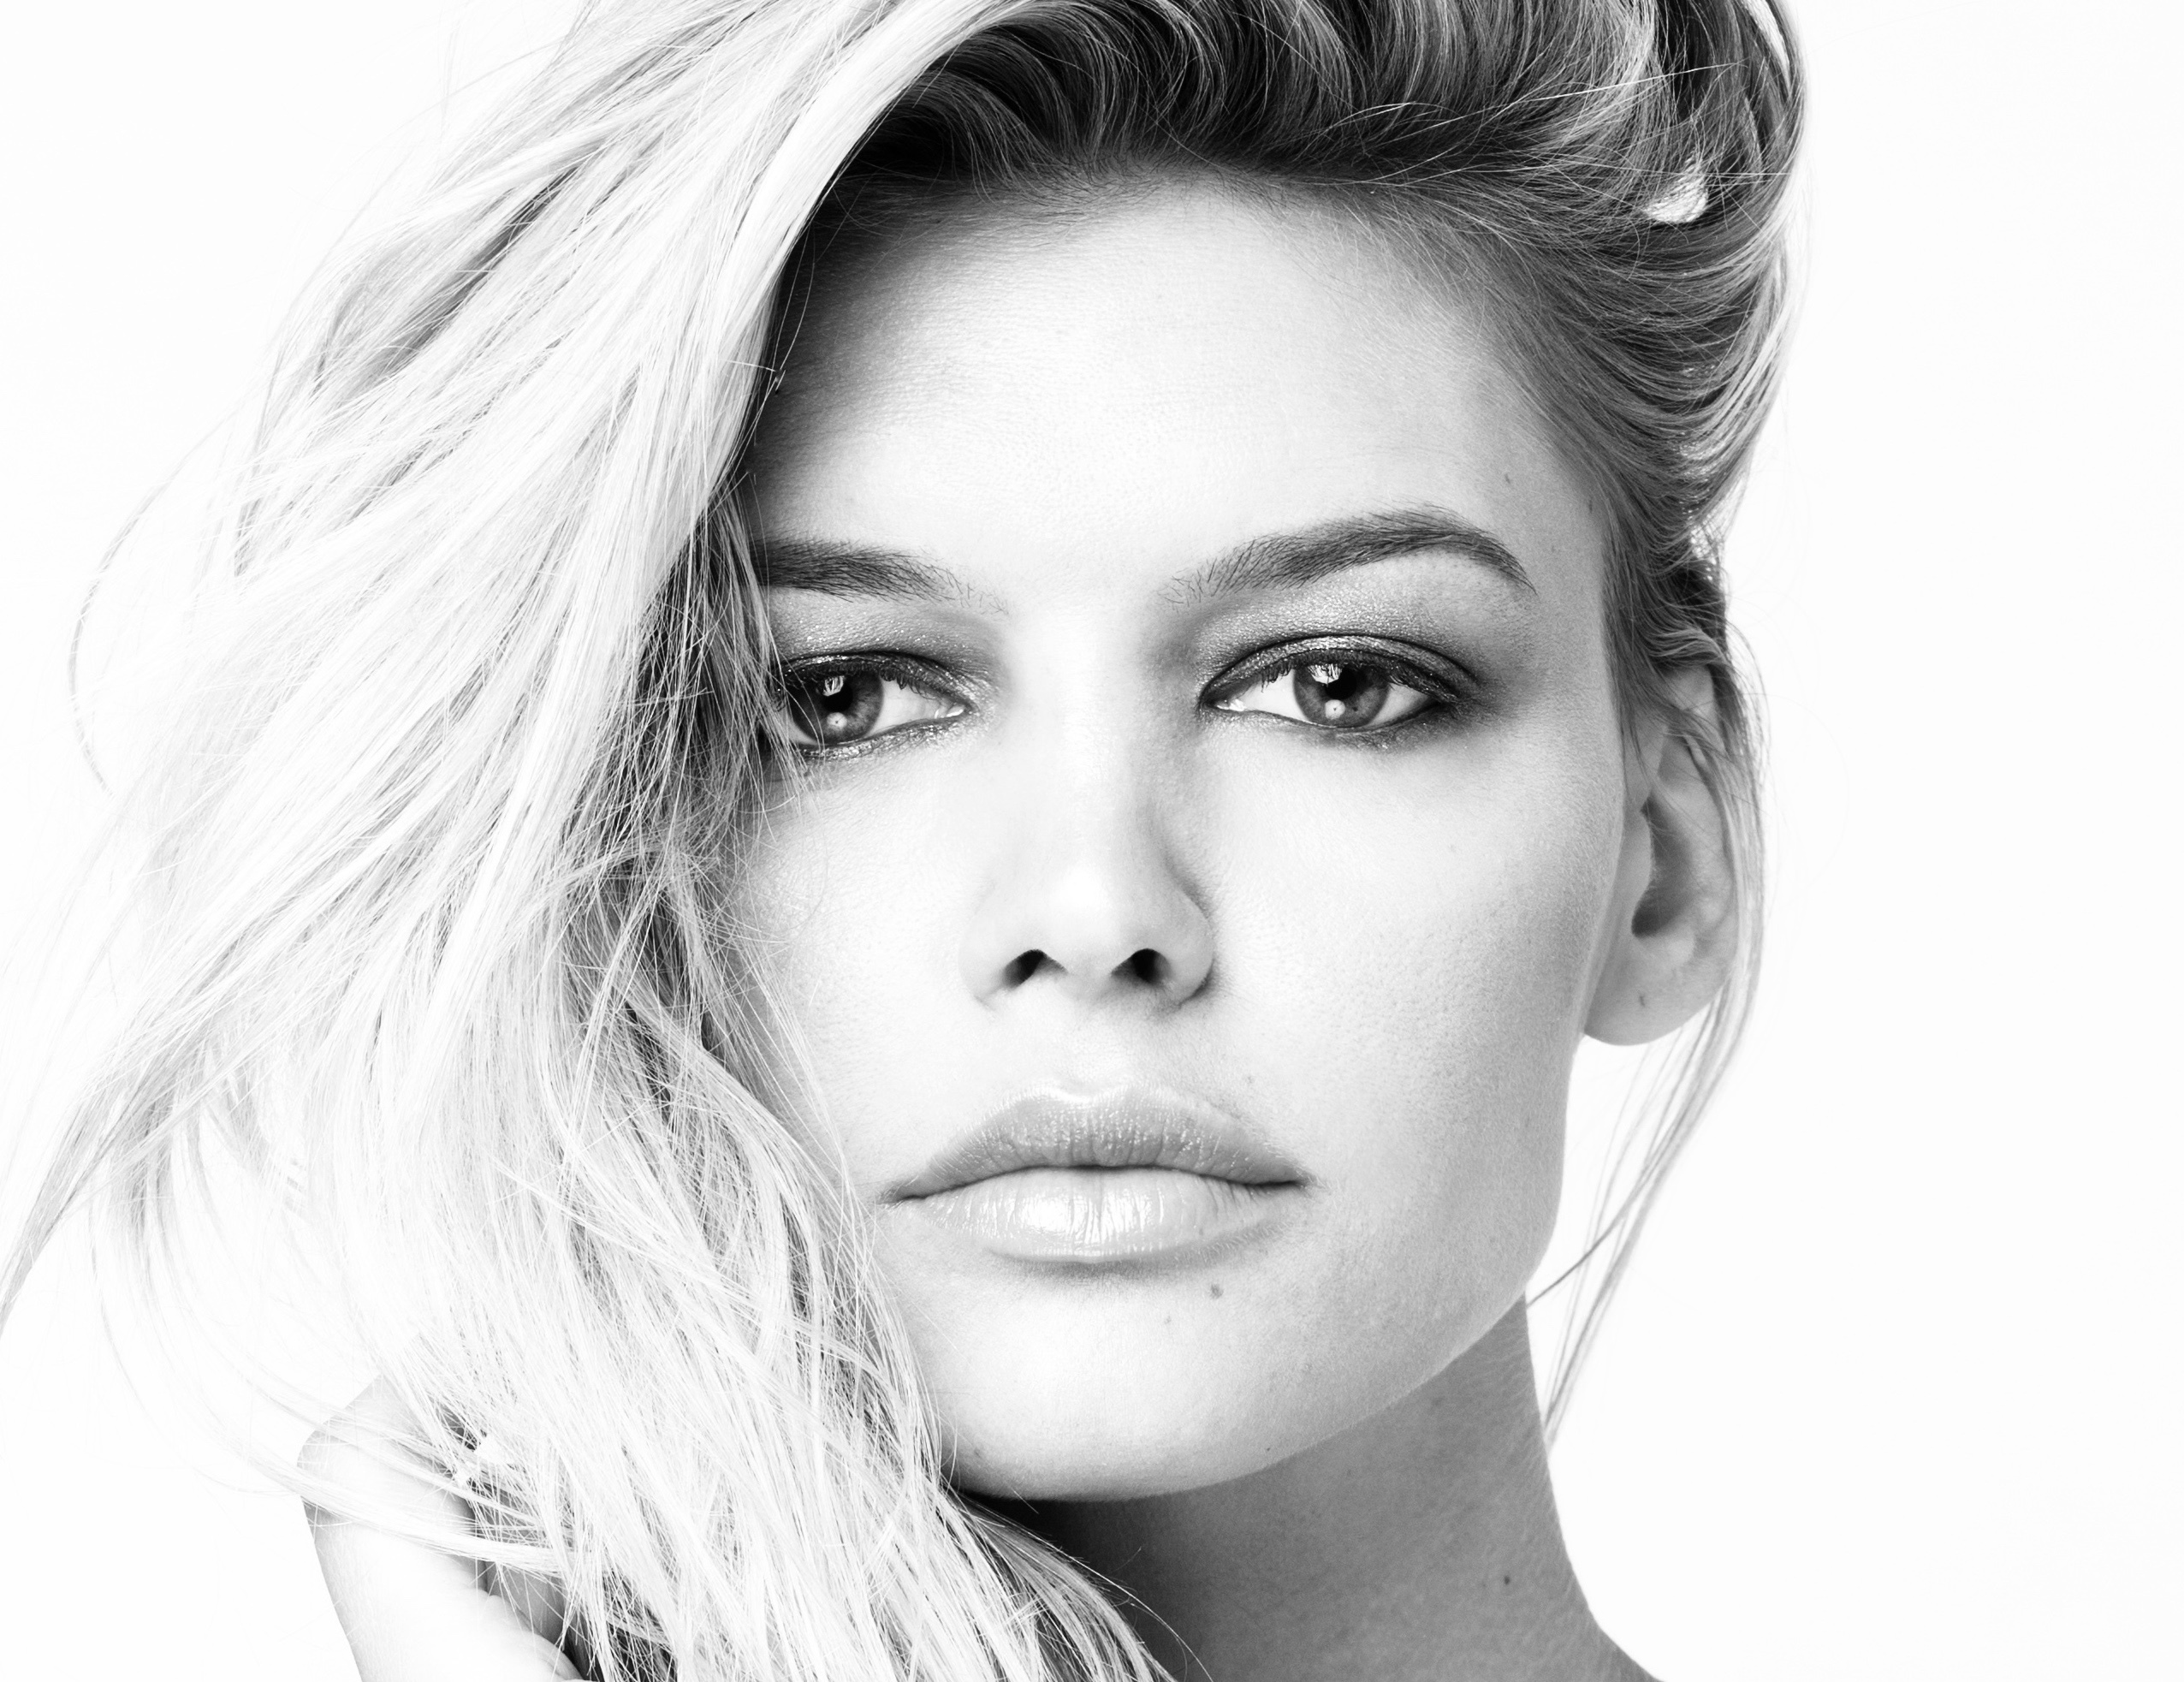 Kelly Rohrbach Wallpapers Images Photos Pictures Backgrounds